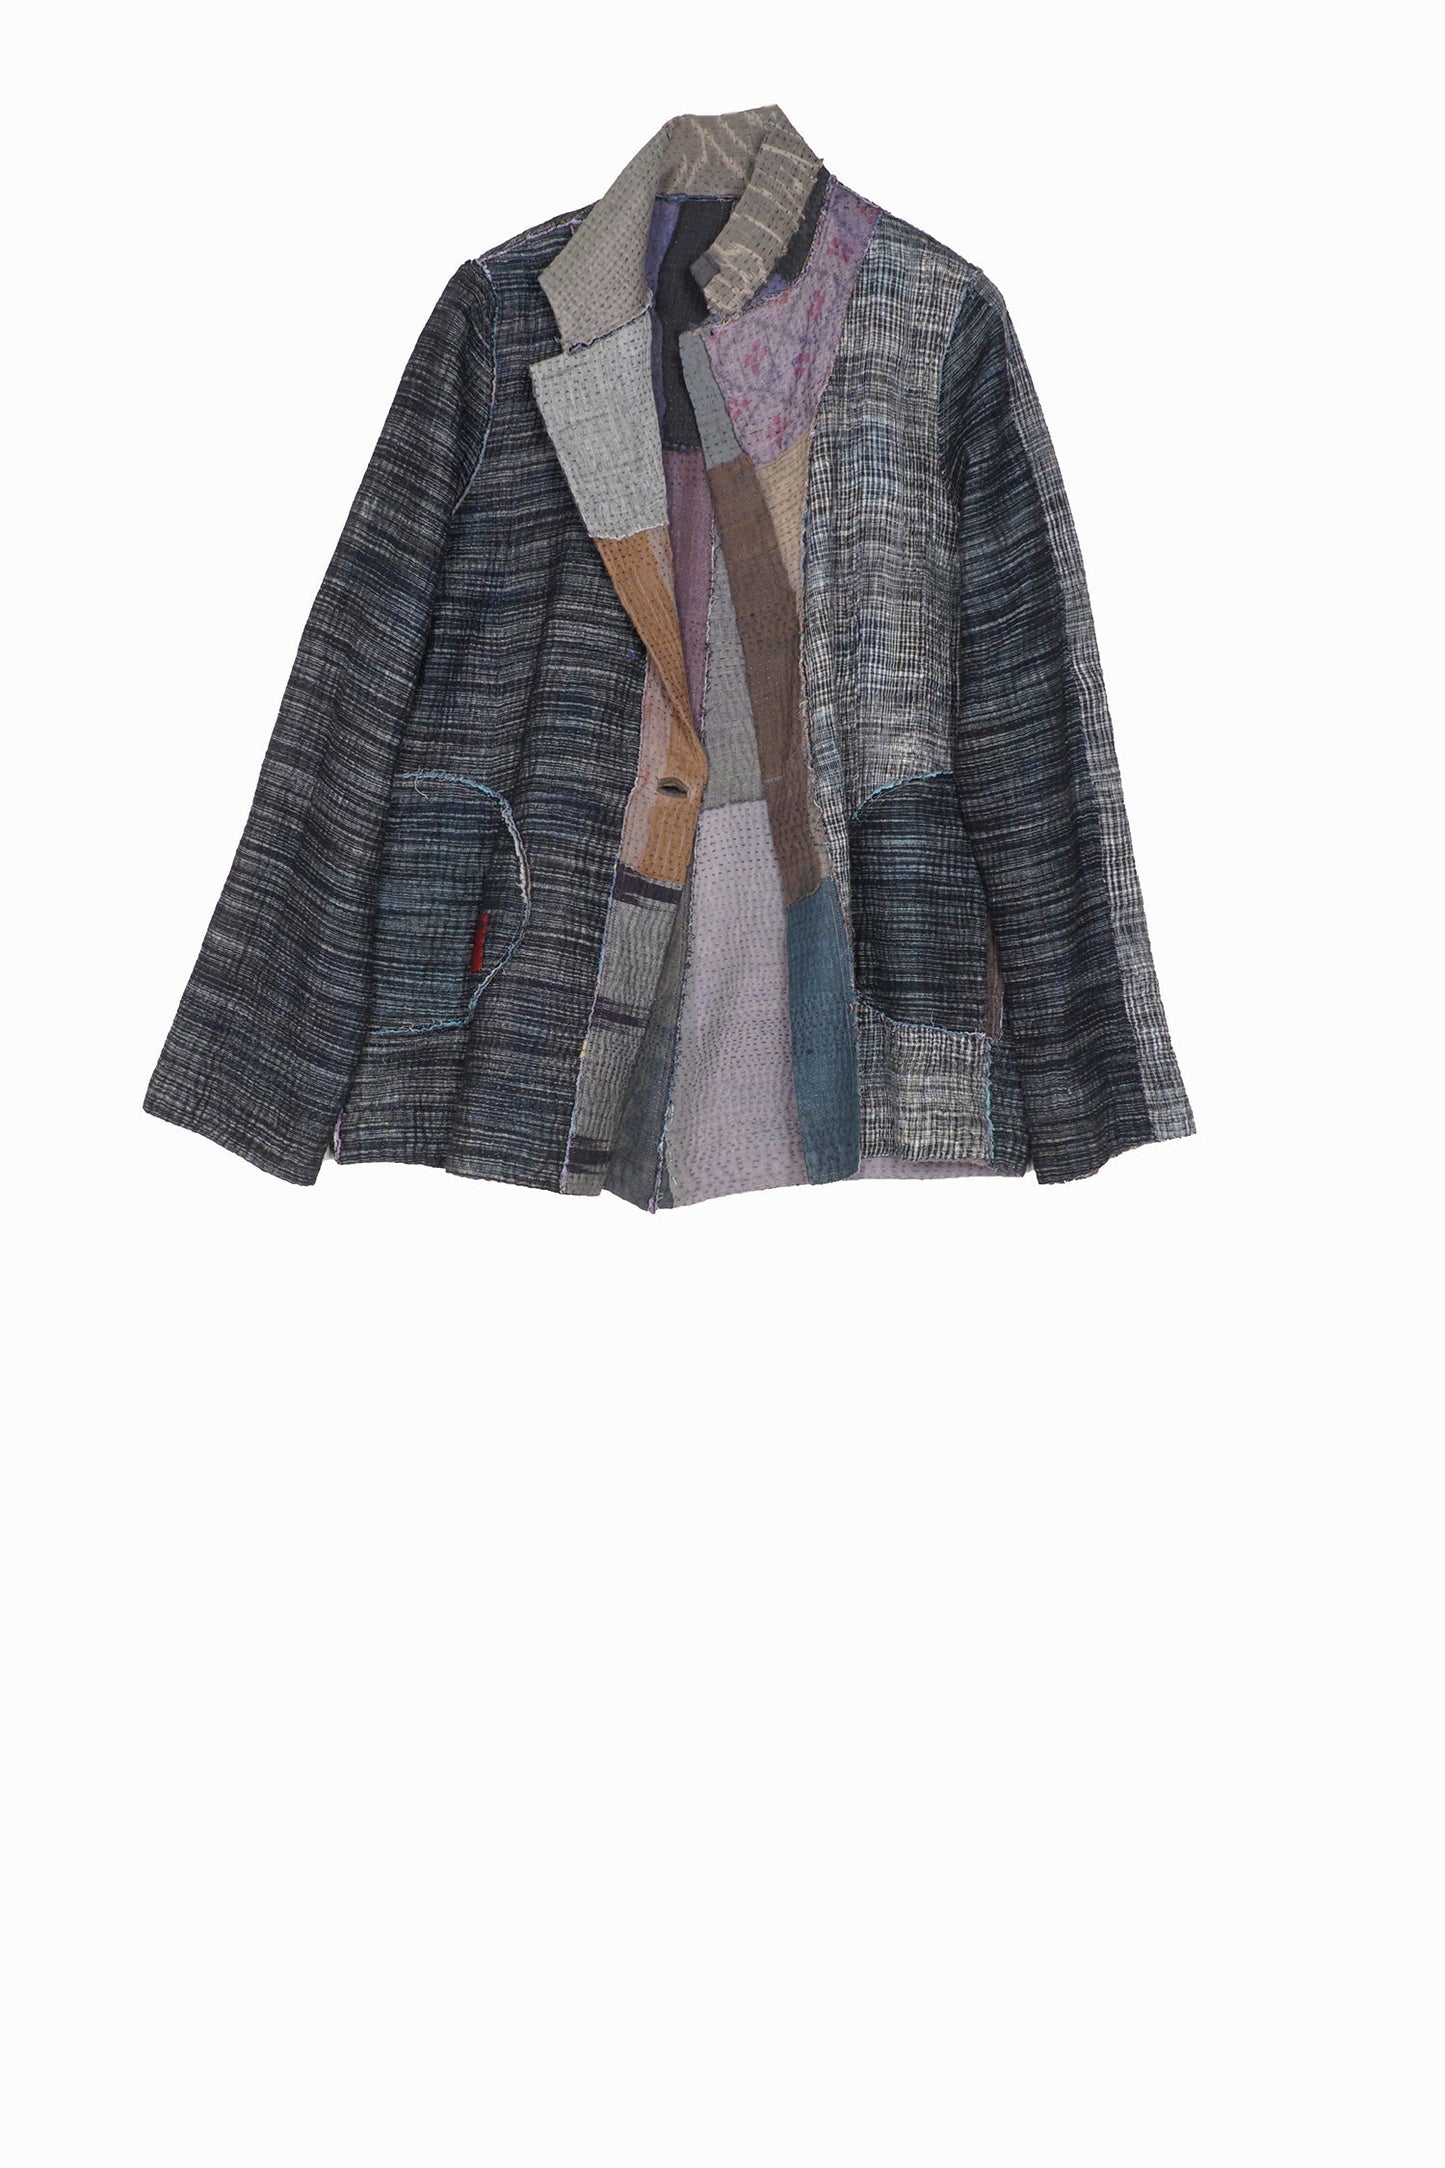 WOVEN IKAT & FRAYED PATCH KANTHA SIMPLE JKT - wk4022-gry -